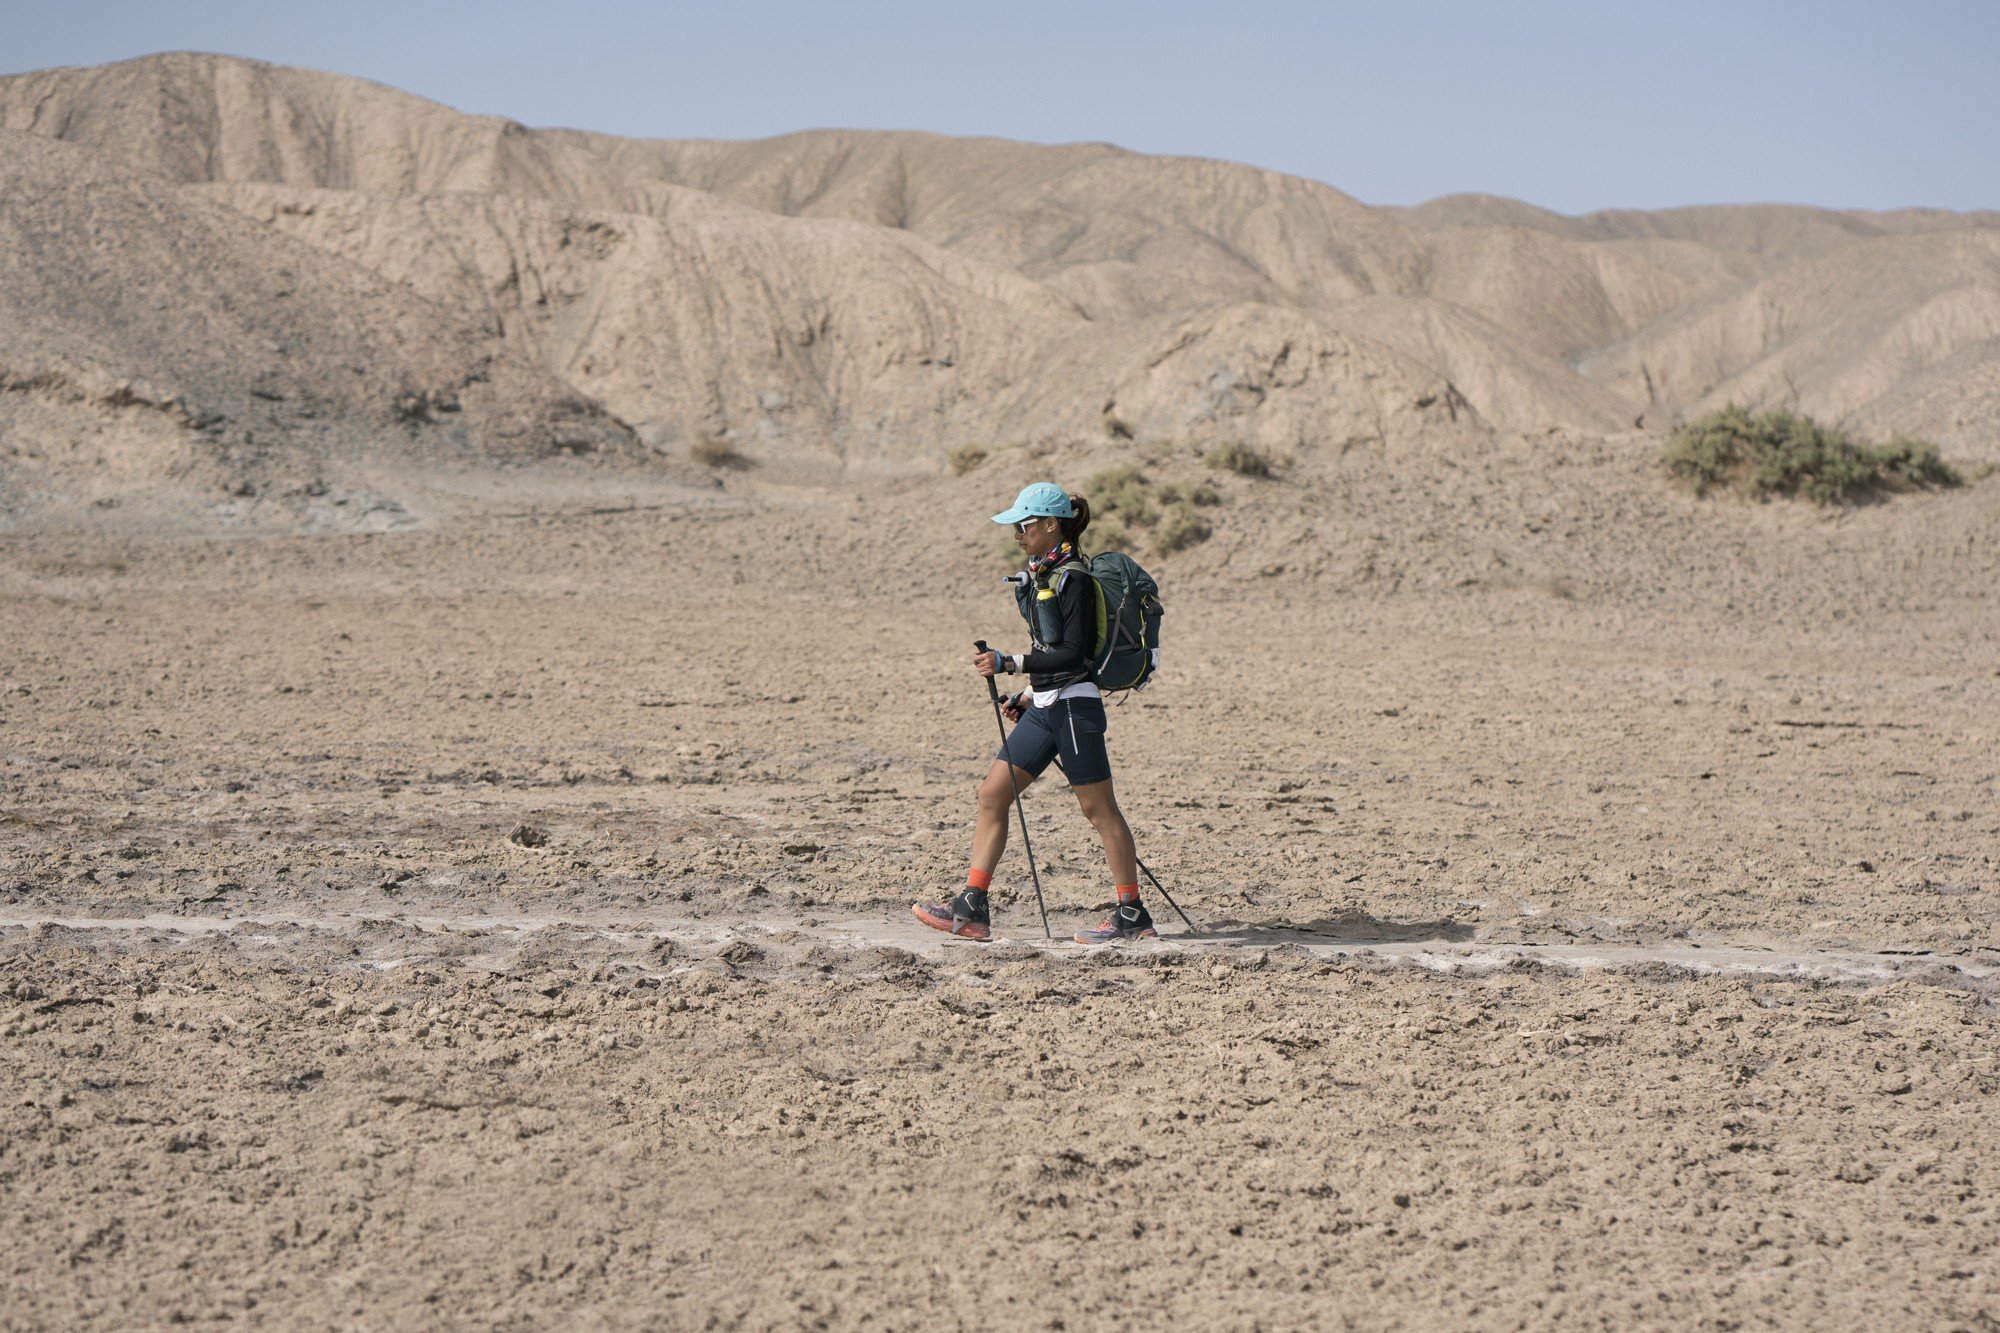 Samantha Chan is looking forward to the race atmosphere in the GaoliGong, but enjoyed the peace and loneliness of the Gobi Desert: Lloyd Belcher Visuals